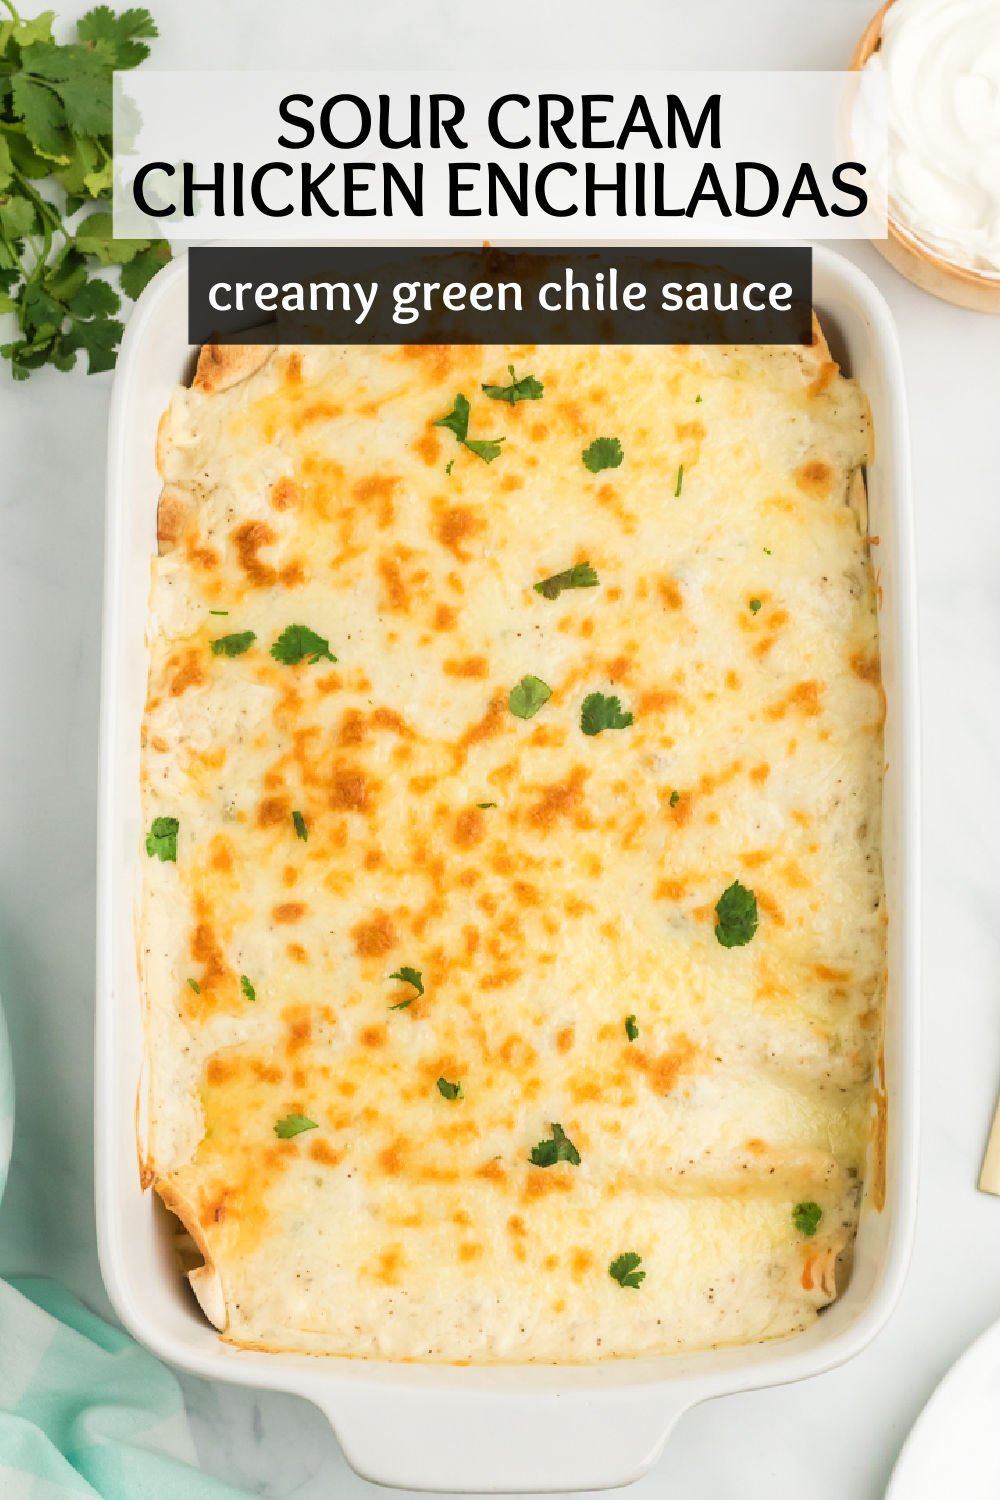 This easy sour cream chicken enchilada recipe starts with flour tortillas that are filled with a seasoned shredded chicken mixture, topped with an amazing sour cream sauce, and baked until cheesy and gooey.  | www.persnicketyplates.com